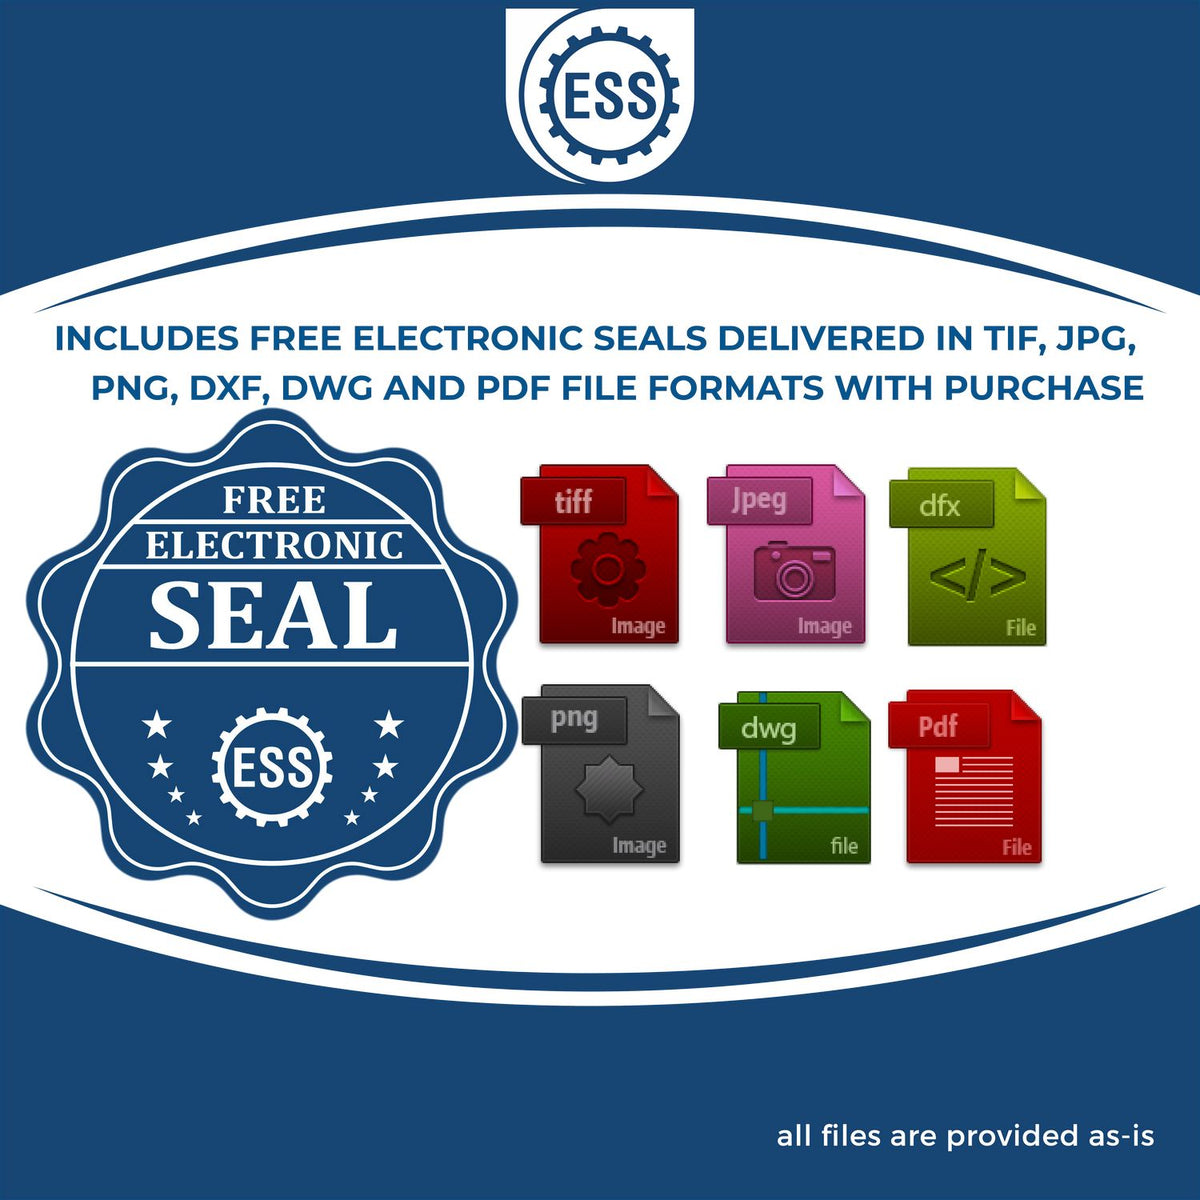 An infographic for the free electronic seal for the MaxLight Premium Pre-Inked New Hampshire State Seal Notarial Stamp illustrating the different file type icons such as DXF, DWG, TIF, JPG and PNG.